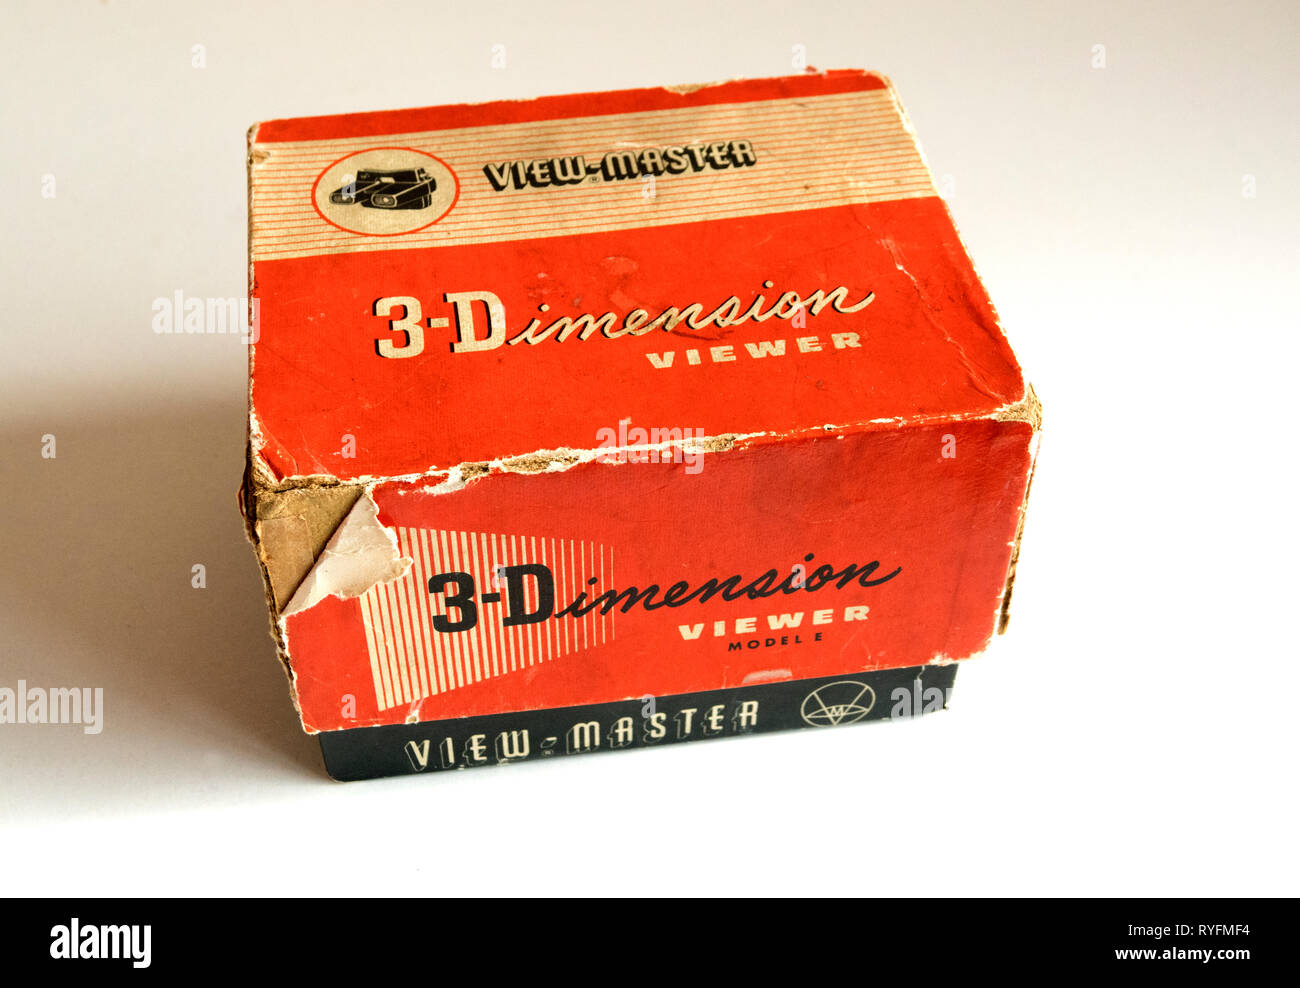 View master 3d dimensions viewer Stock Photo